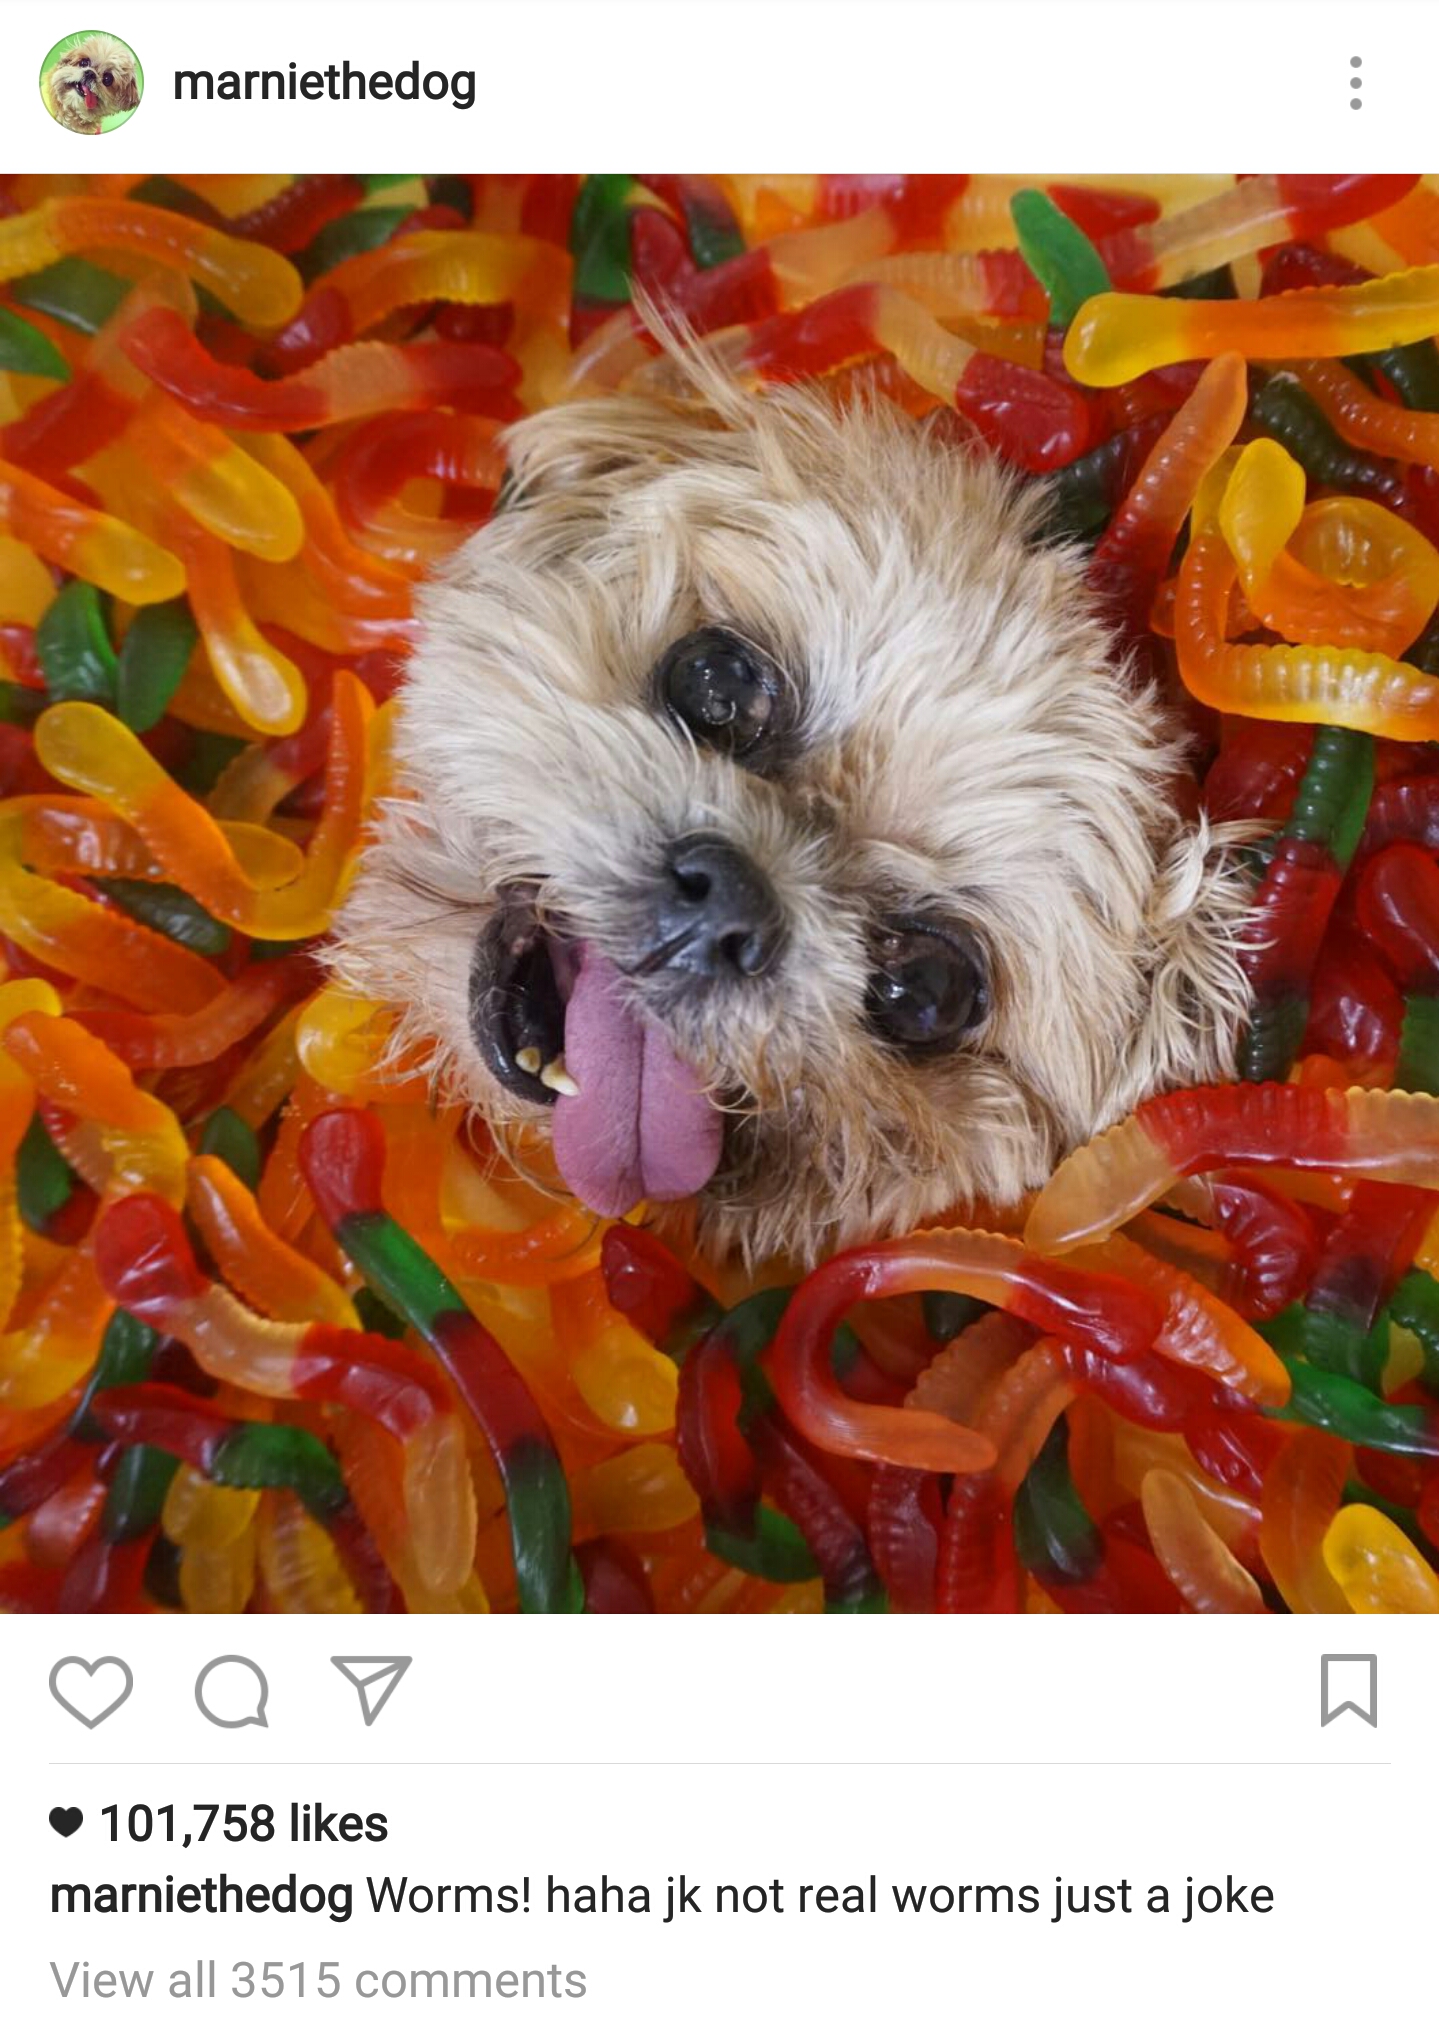 @marniethedog is a 15 year old Shih Tzu with over 2 million Instagram fans and a great message about dog adoption. This shelter pup found her fame after being rescued at the age of 11, and helps spread reminders about the love and companionship of senior dogs. Sun's out, tongue's out- way to be cute with that little tongue hanging out in nearly all your photos Marnie!  